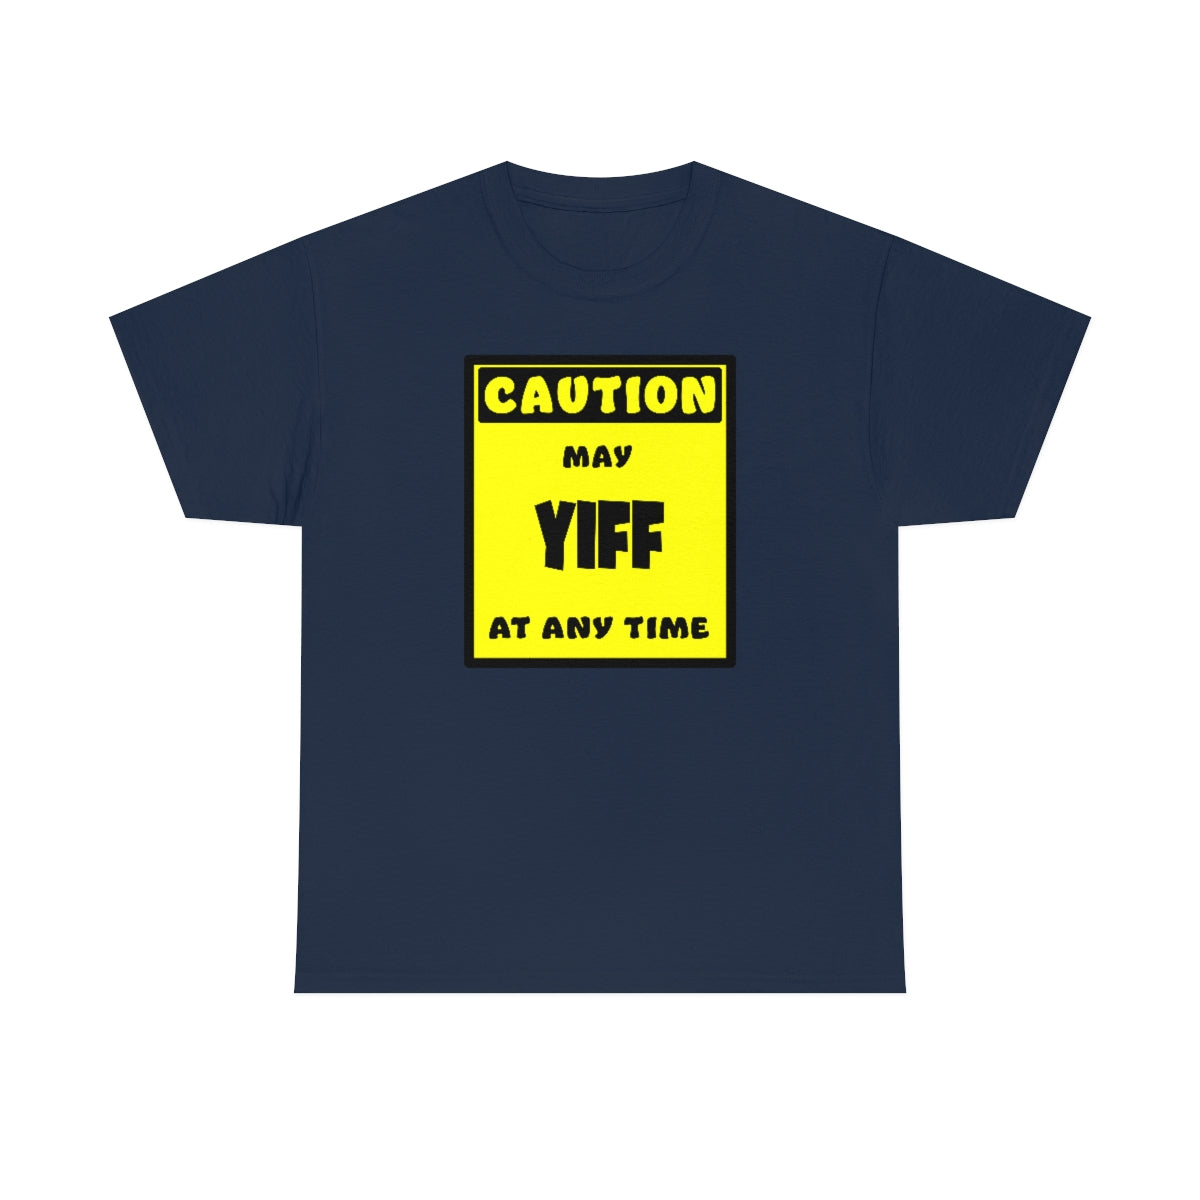 CAUTION! May YIFF at any time! - T-Shirt T-Shirt AFLT-Whootorca Navy Blue S 